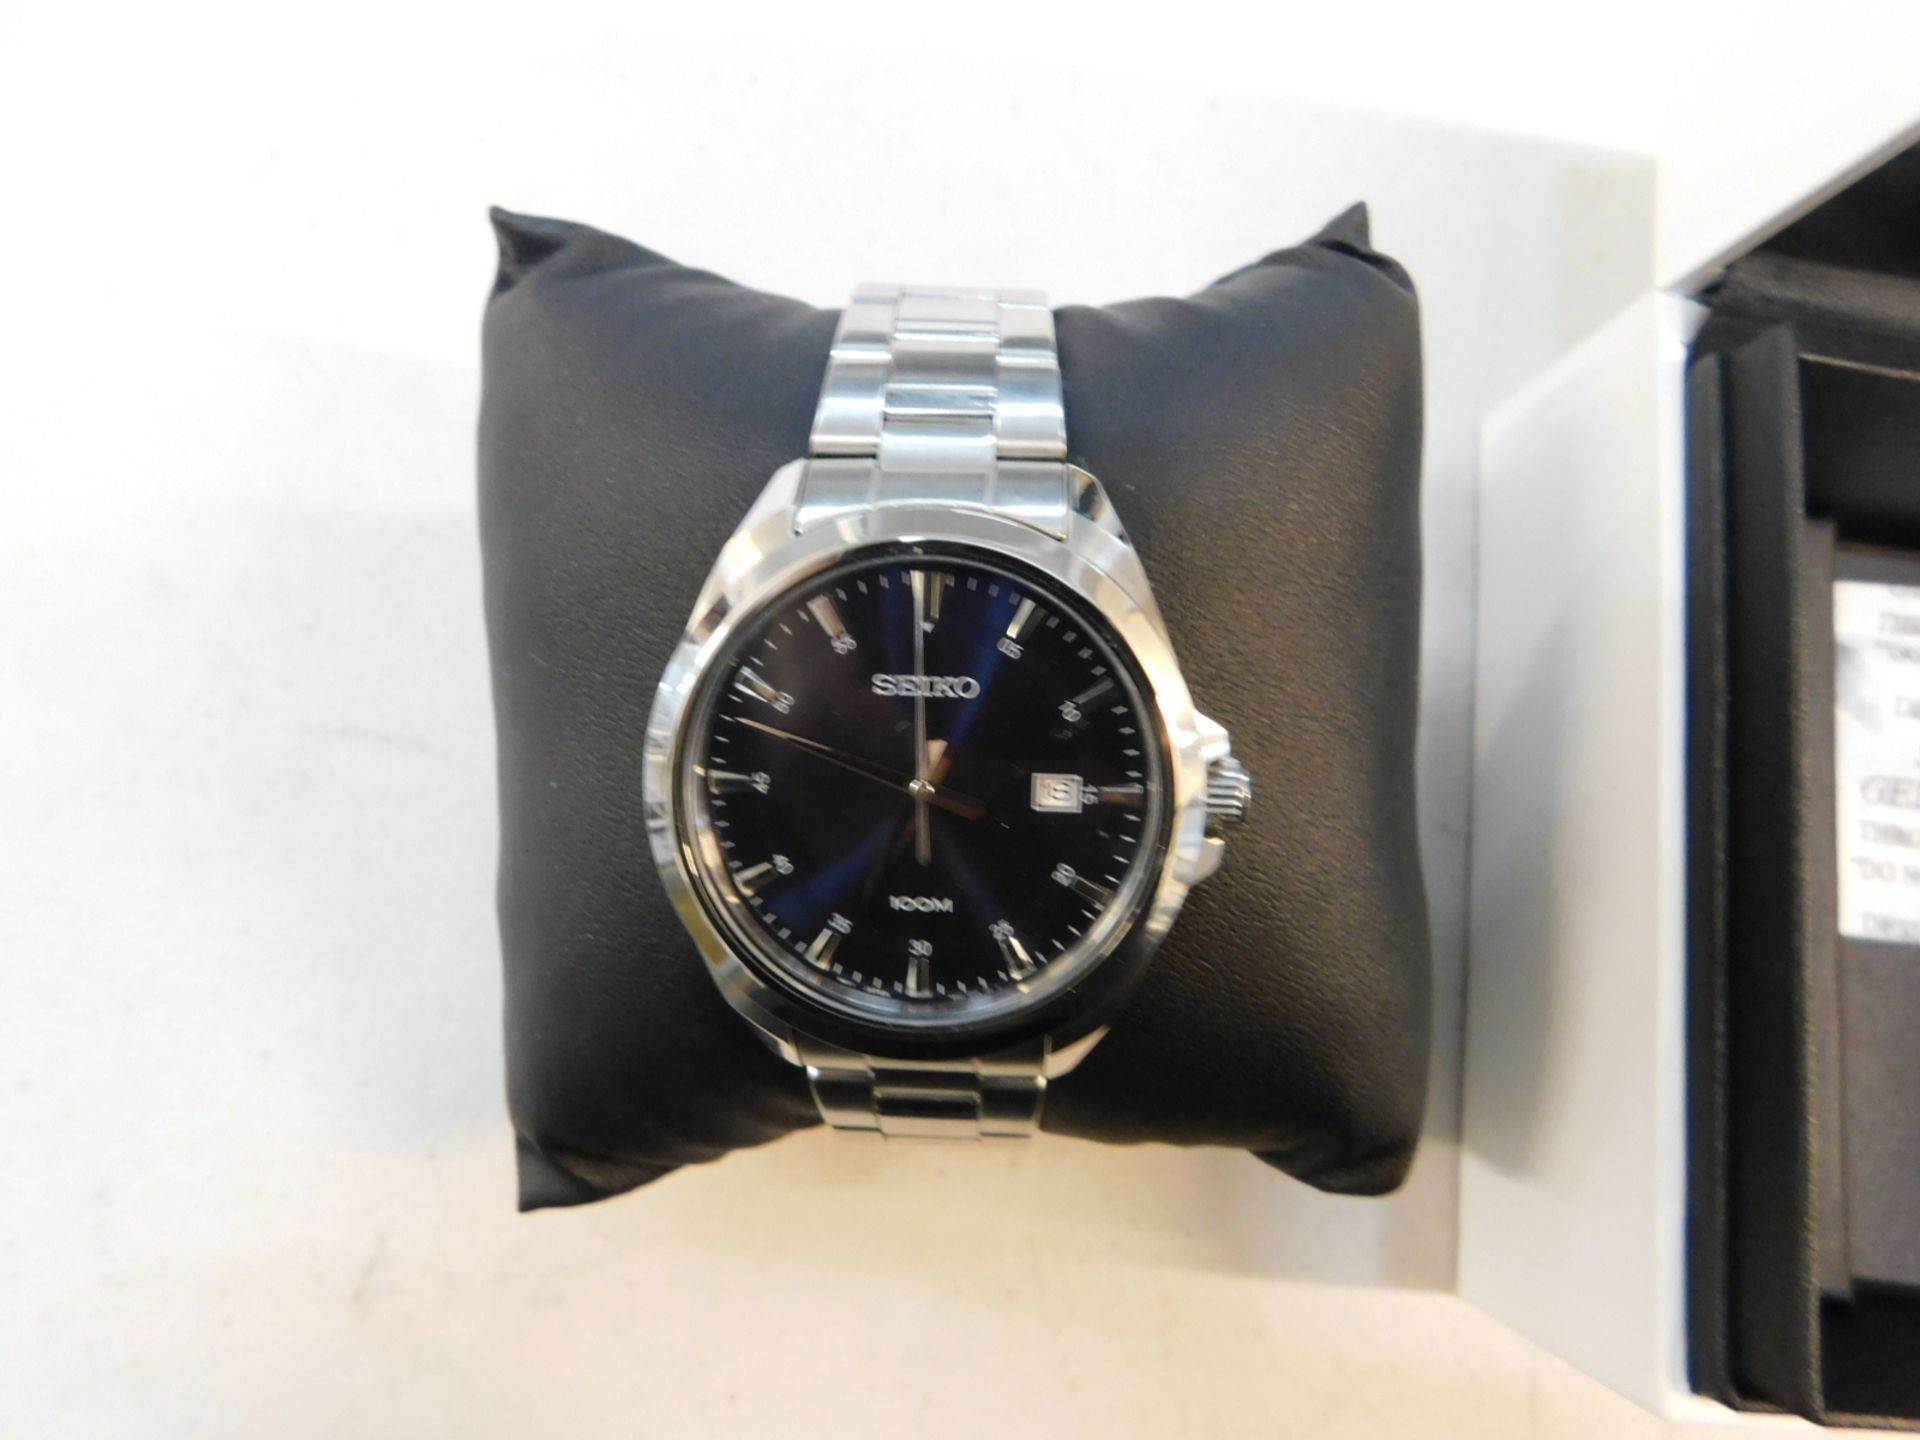 1 BOXED SEIKO GENTS WATCH MODEL 6N42-00H0 RRP £179.99